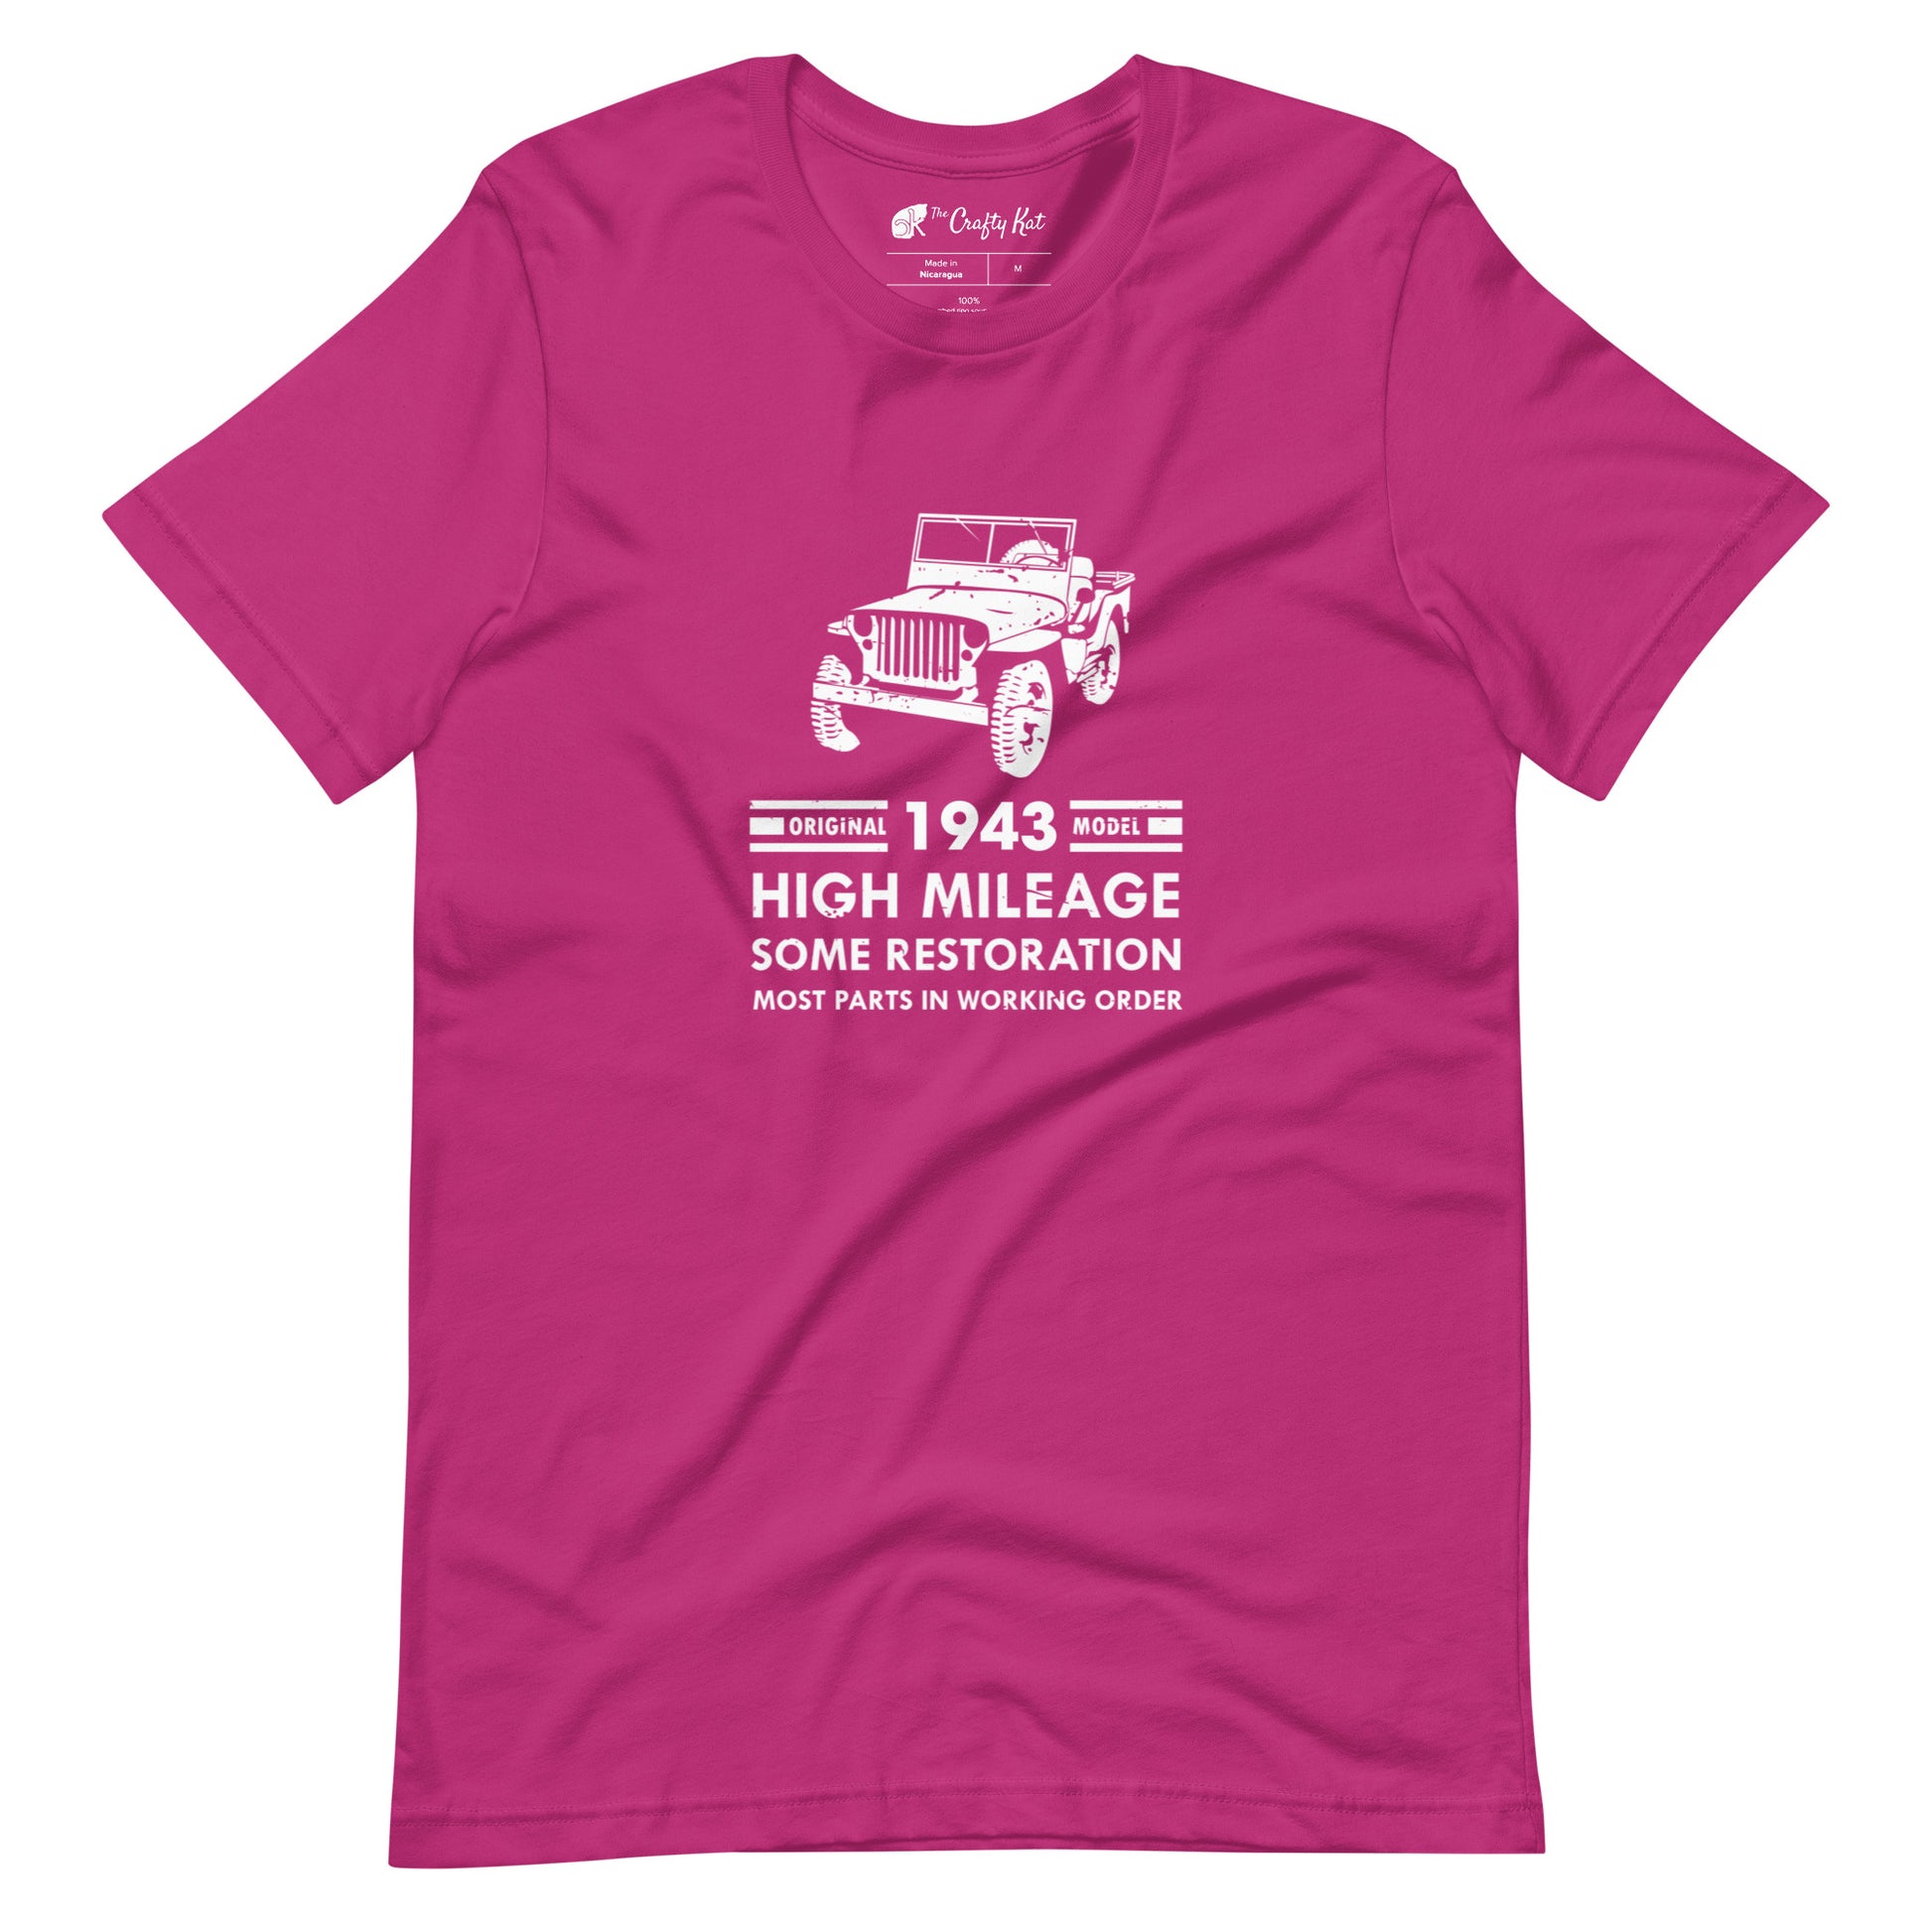 Berry (hot pink) t-shirt with distressed graphic of old military jeep and text "Original YEAR model HIGH MILEAGE some restoration MOST PARTS IN WORKING ORDER"